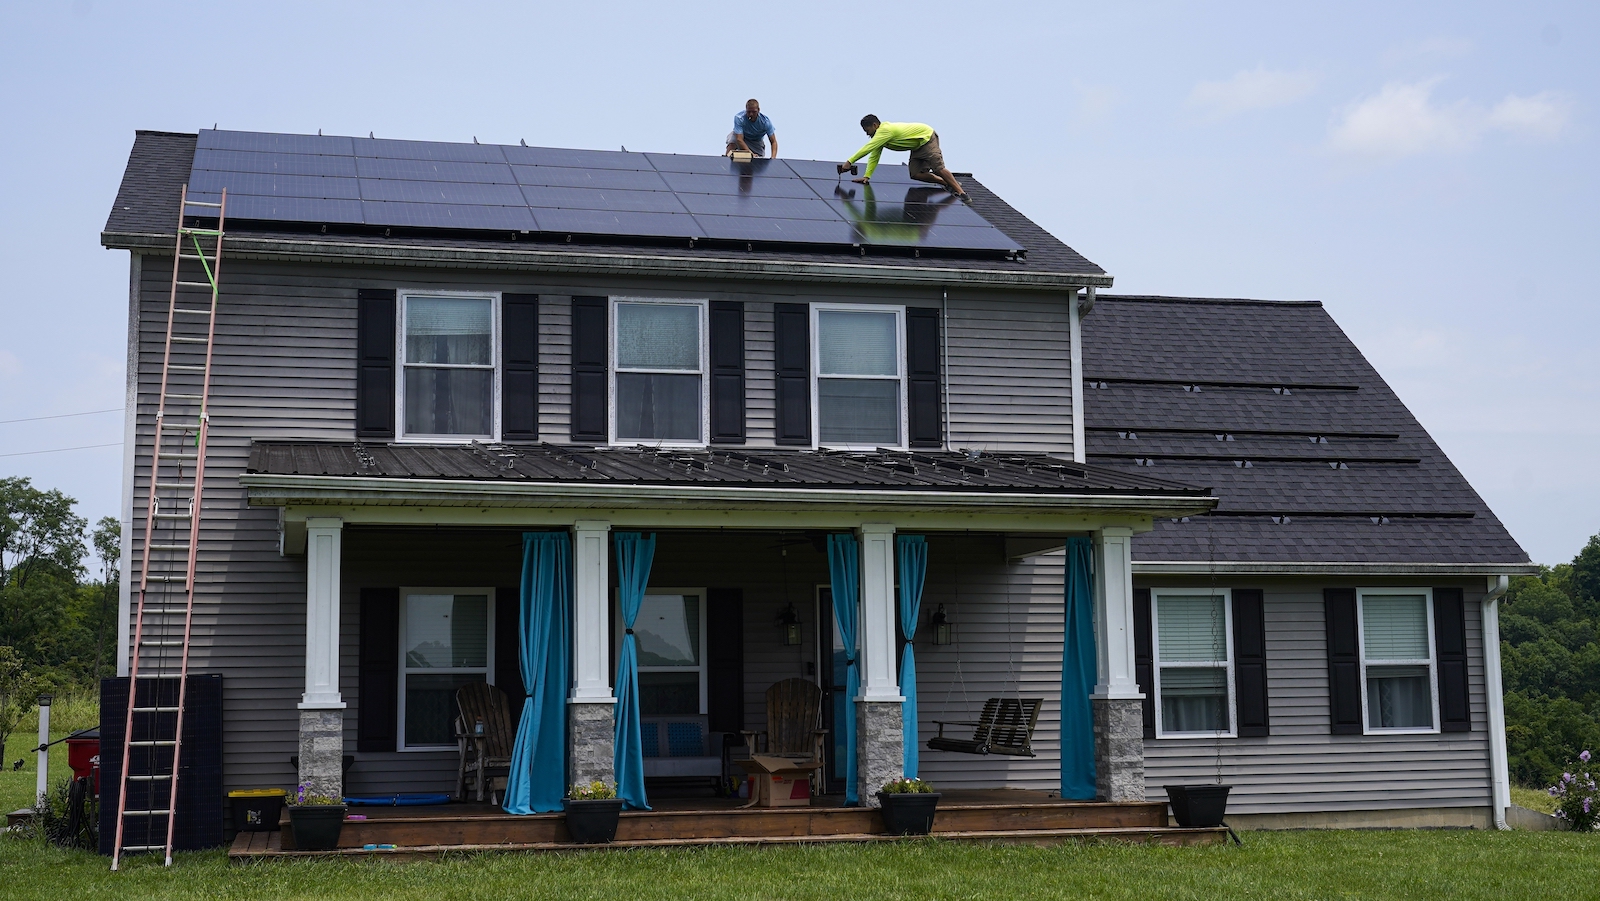 Two men install solar panels on the roof of a two-story house with a shingled roof and white columns on the gabled front porch.